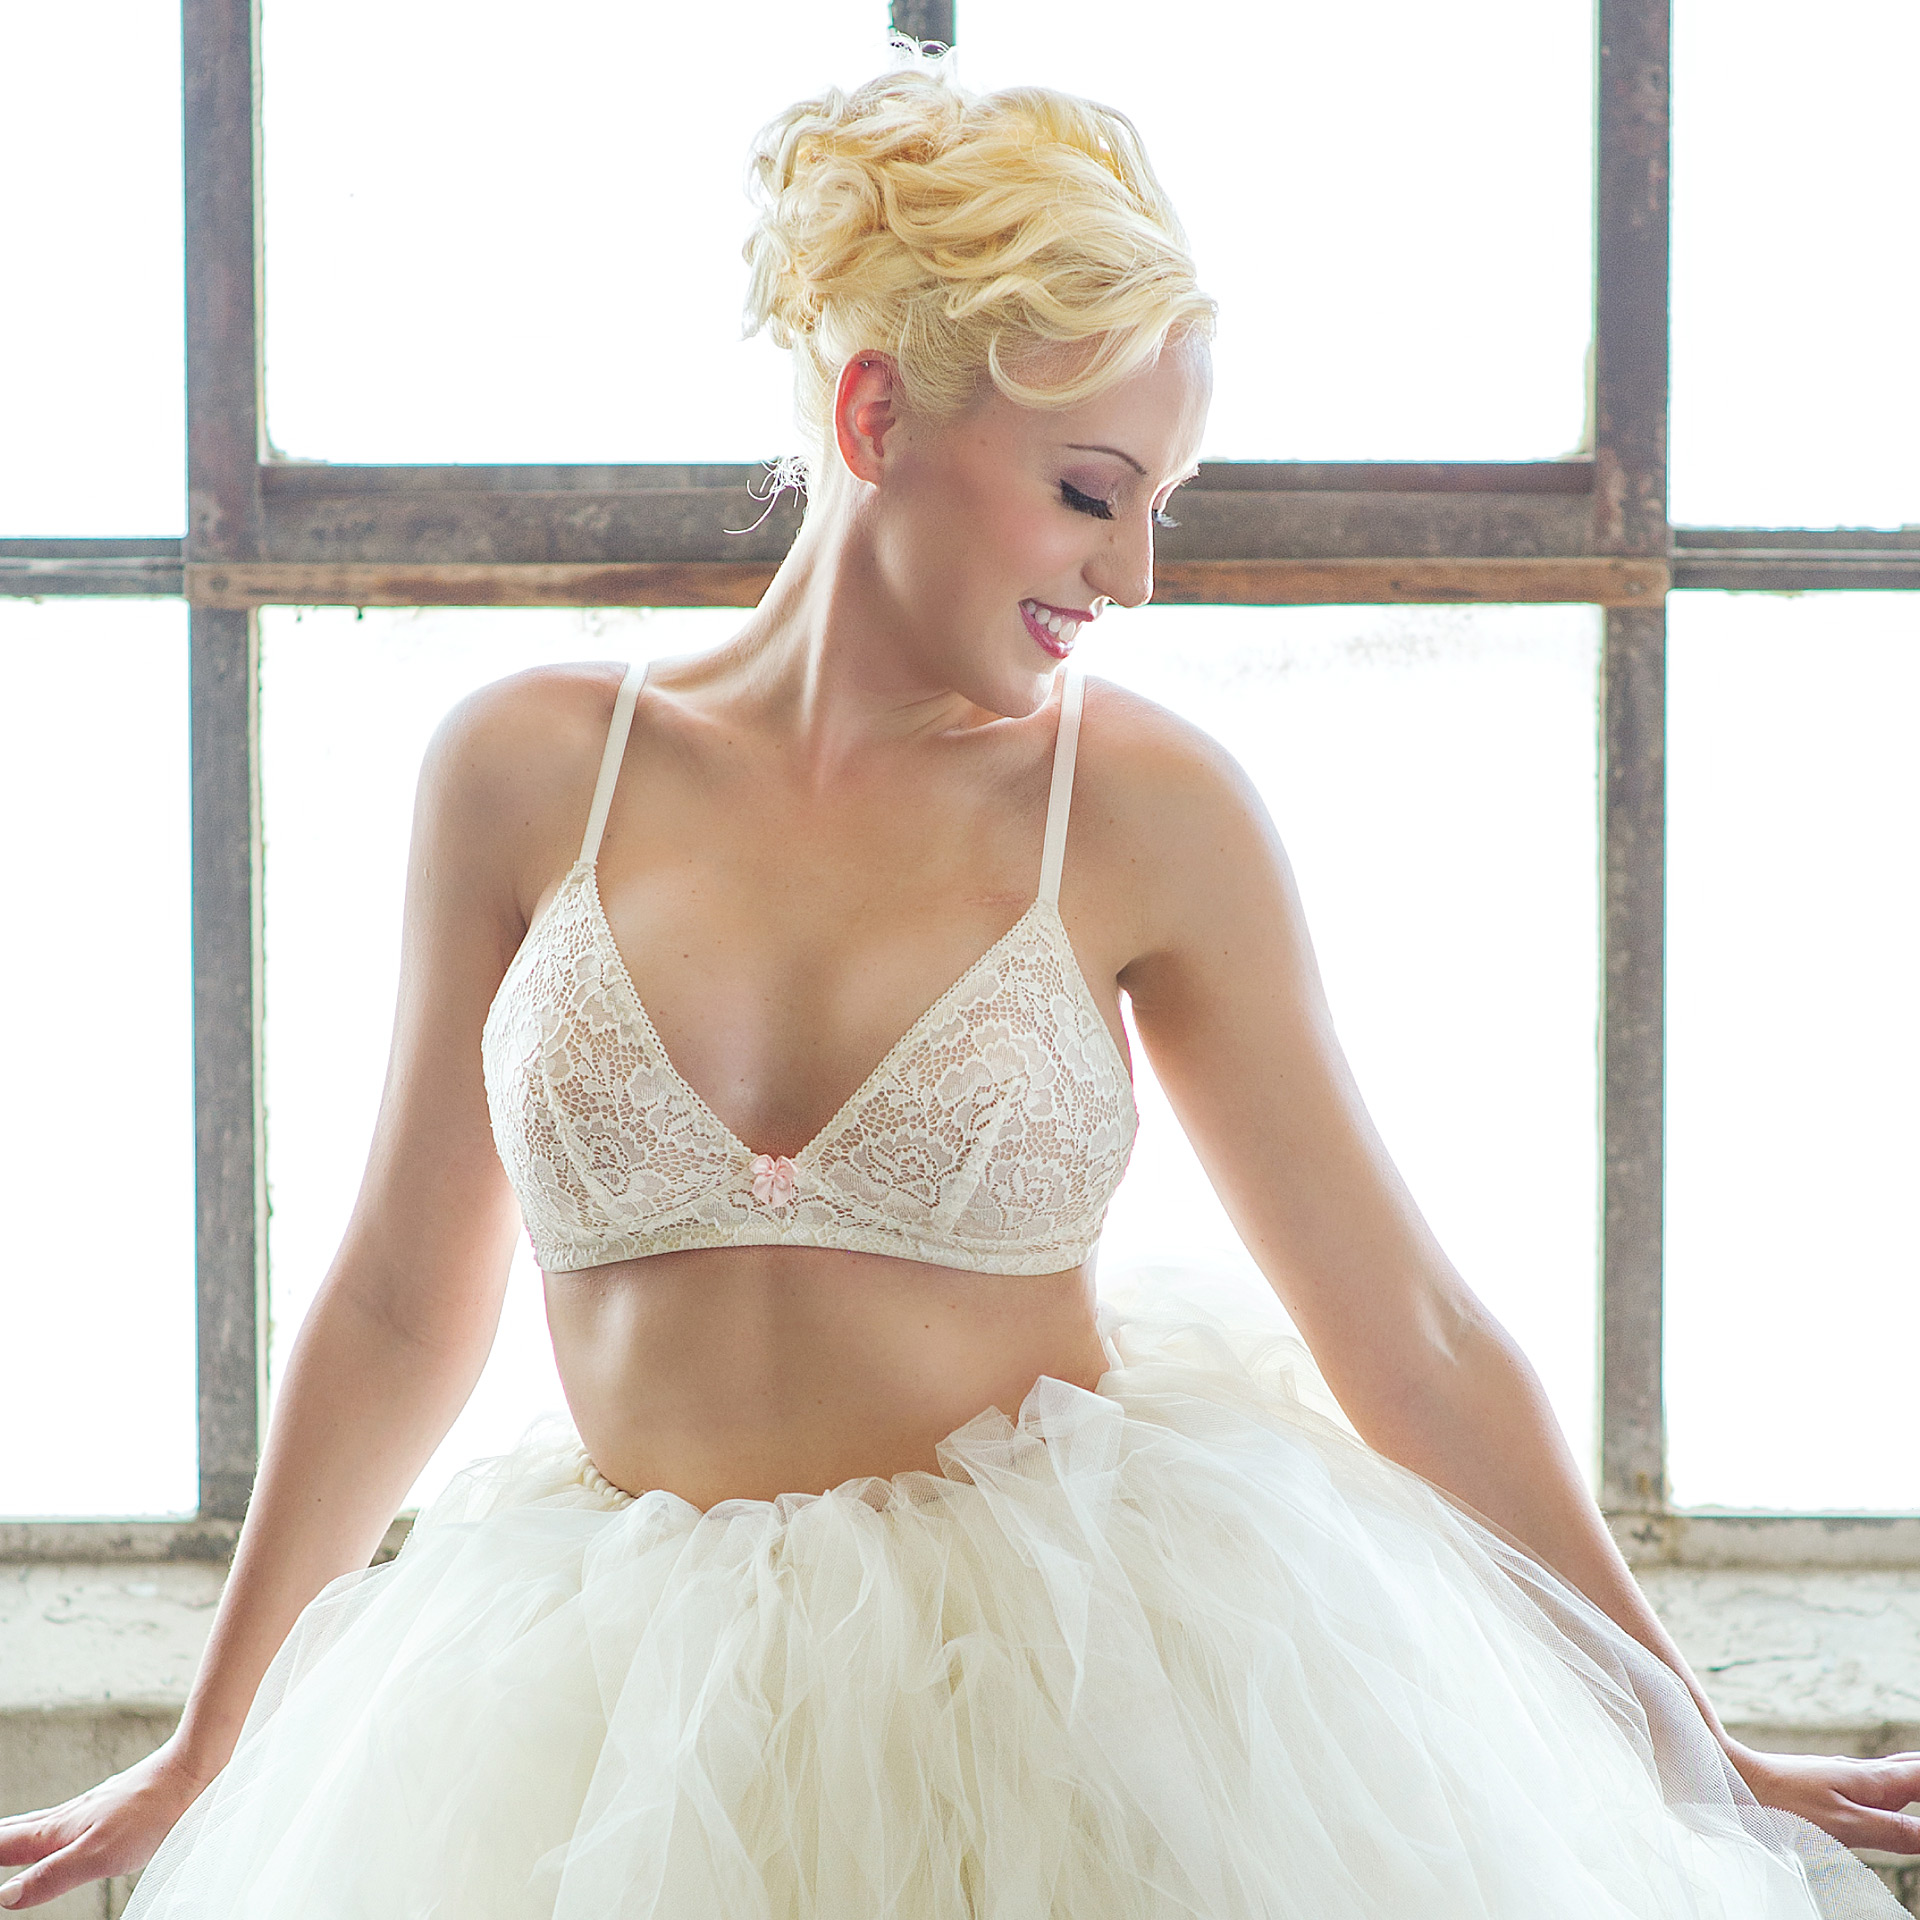 AnaOno Founder Dana Donofree Designs Beautiful Lingerie for Breast